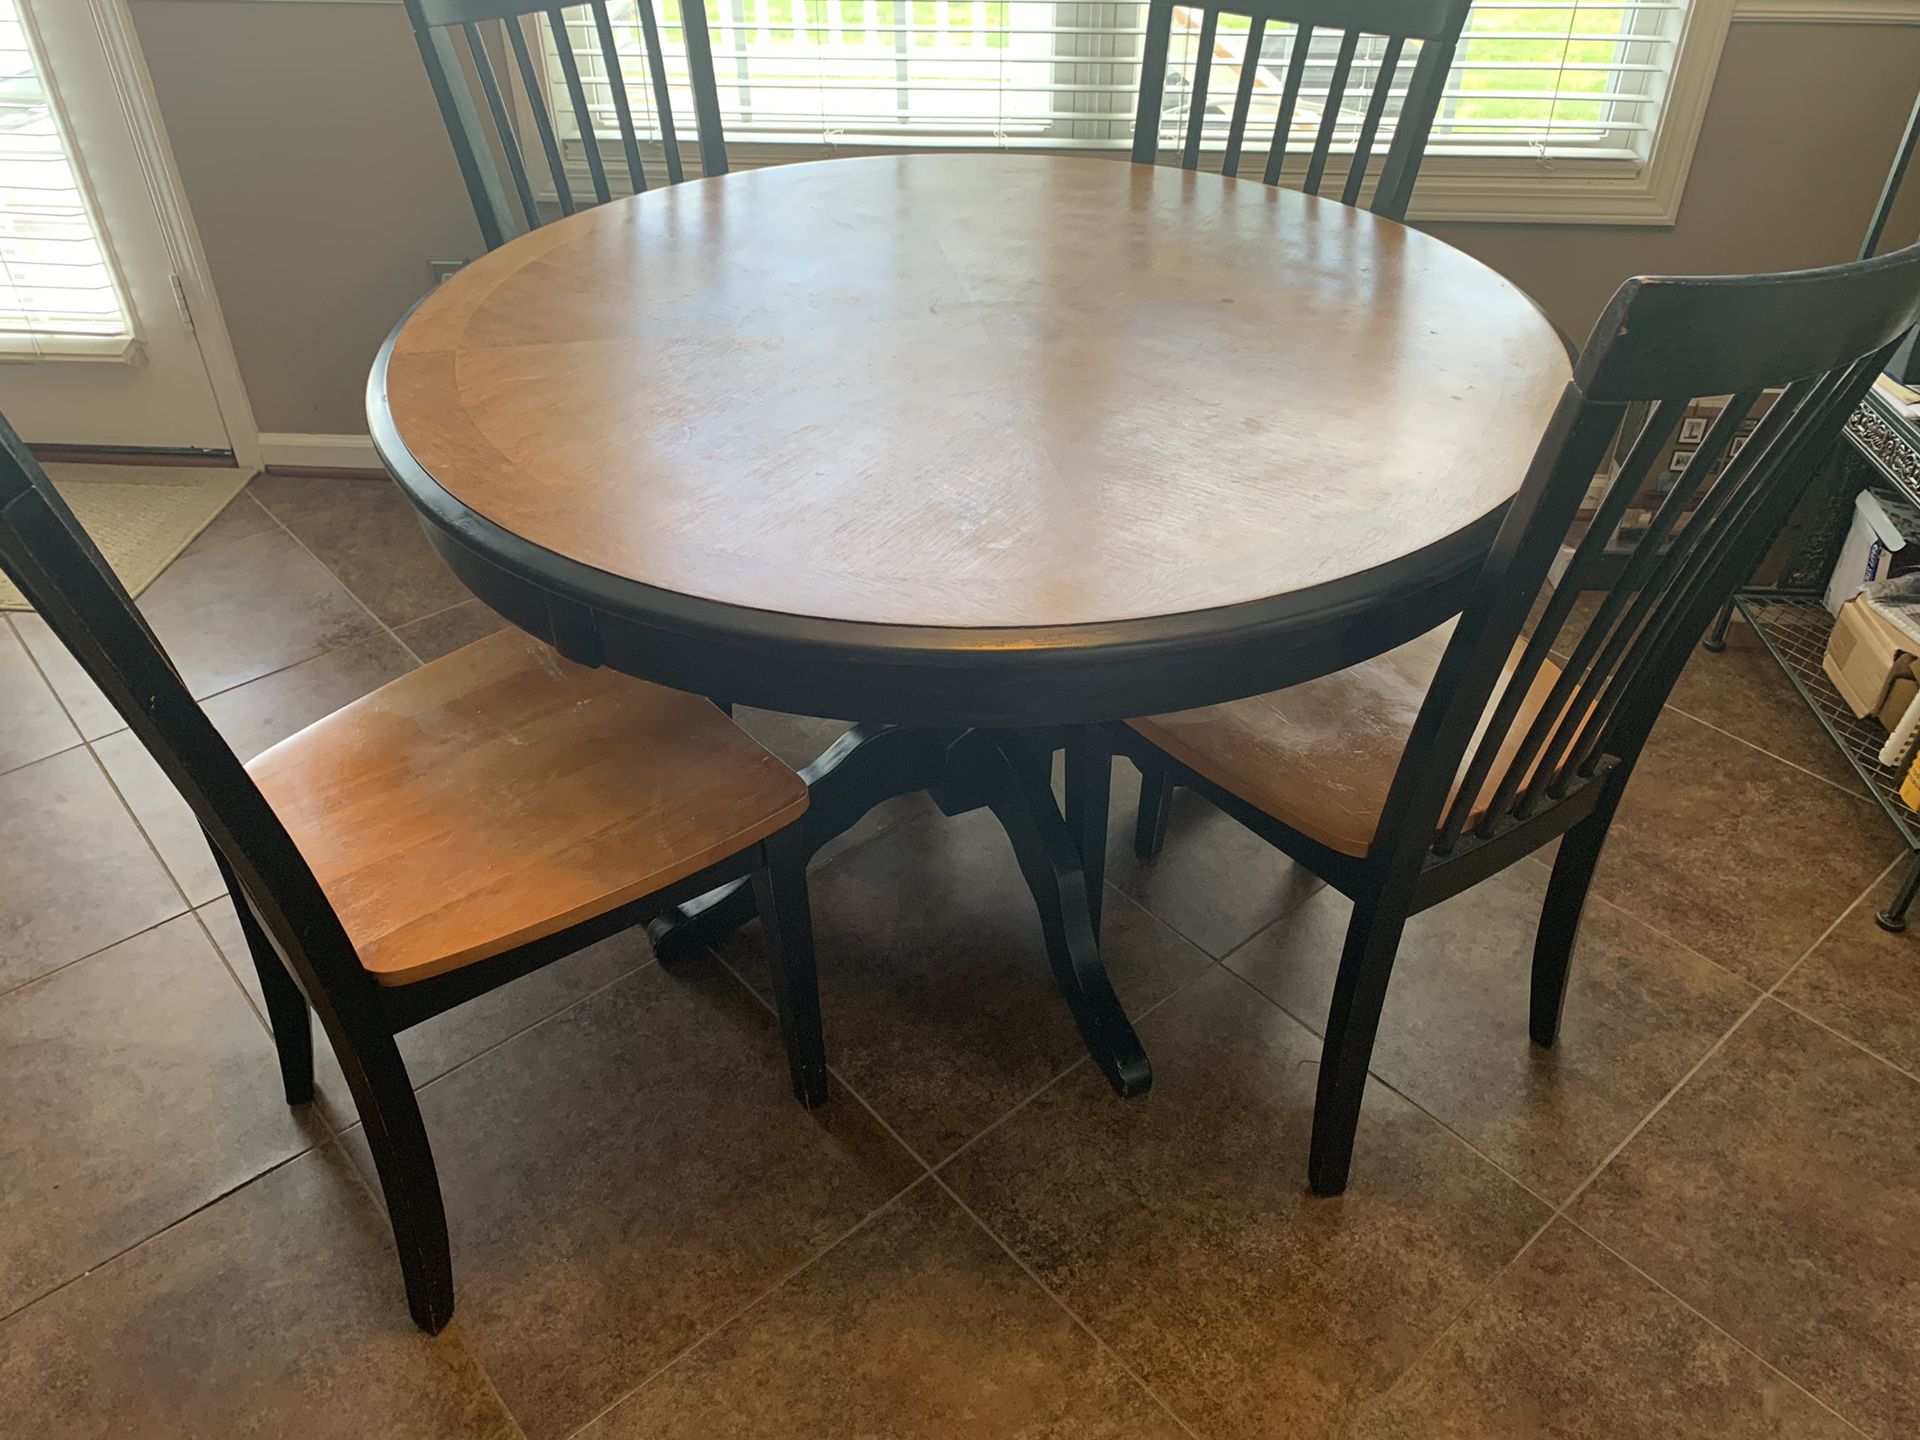 Kitchen table / Good deal $150 !!